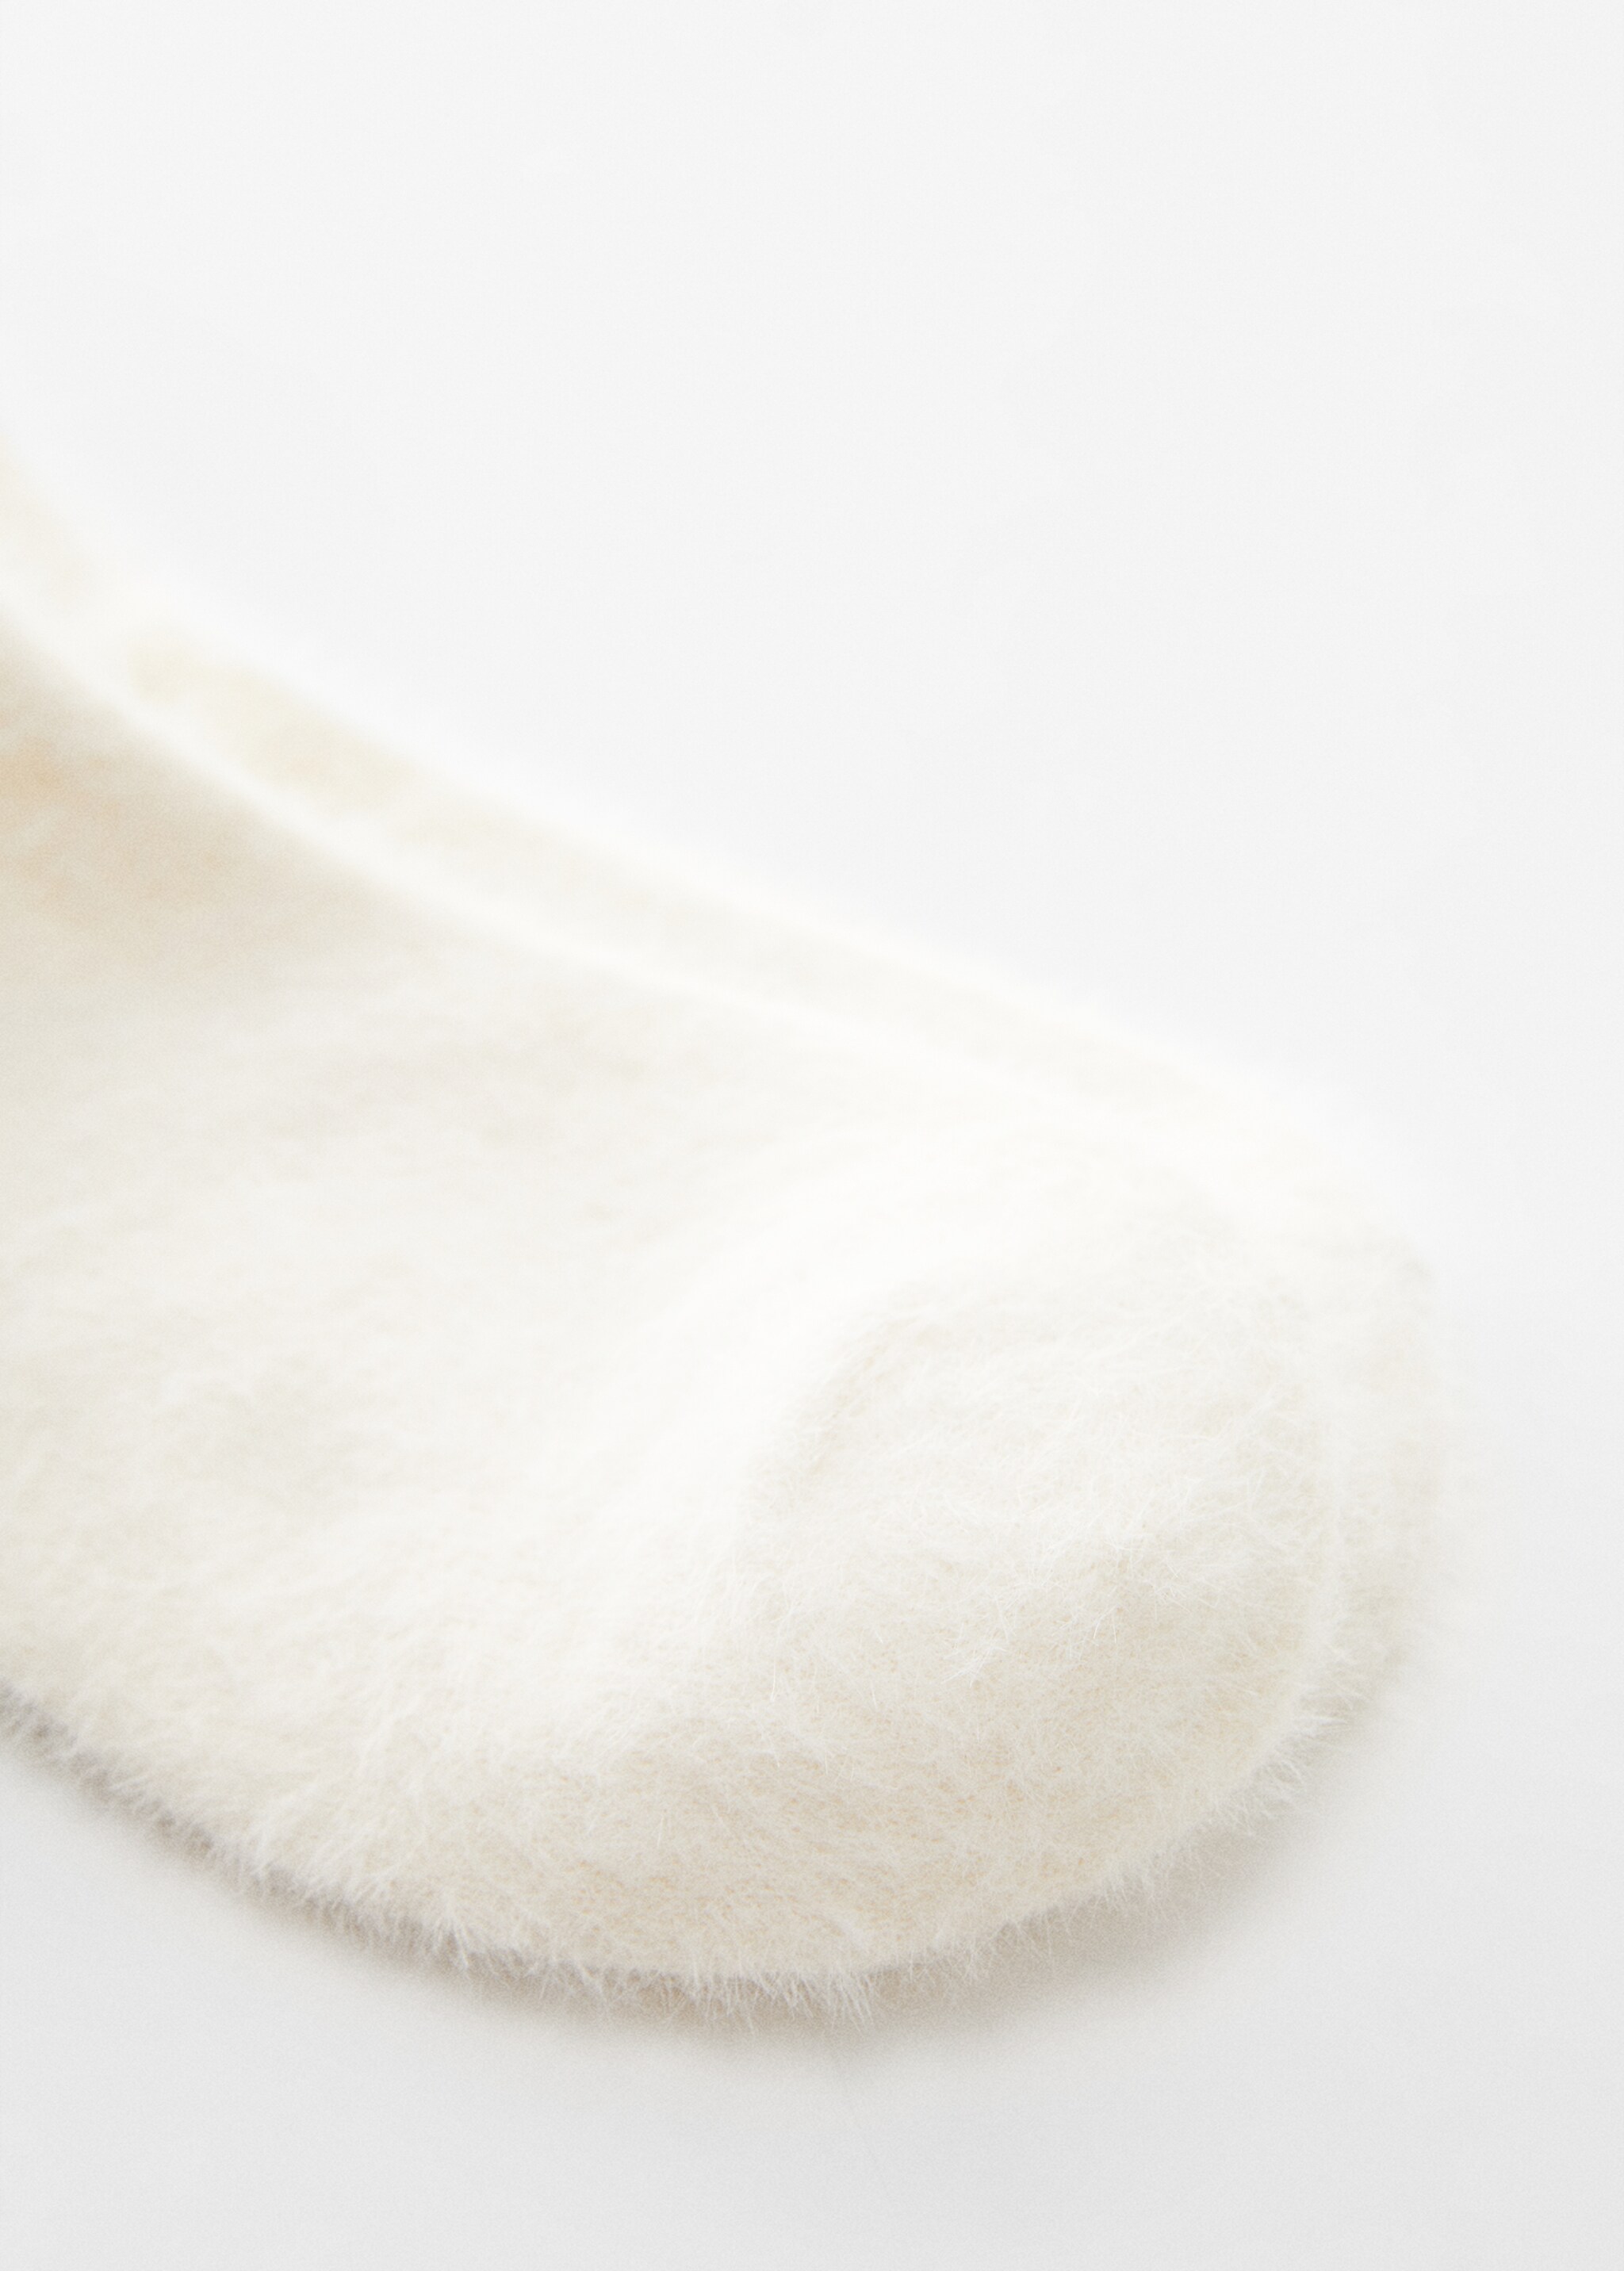 Soft finish socks - Details of the article 1